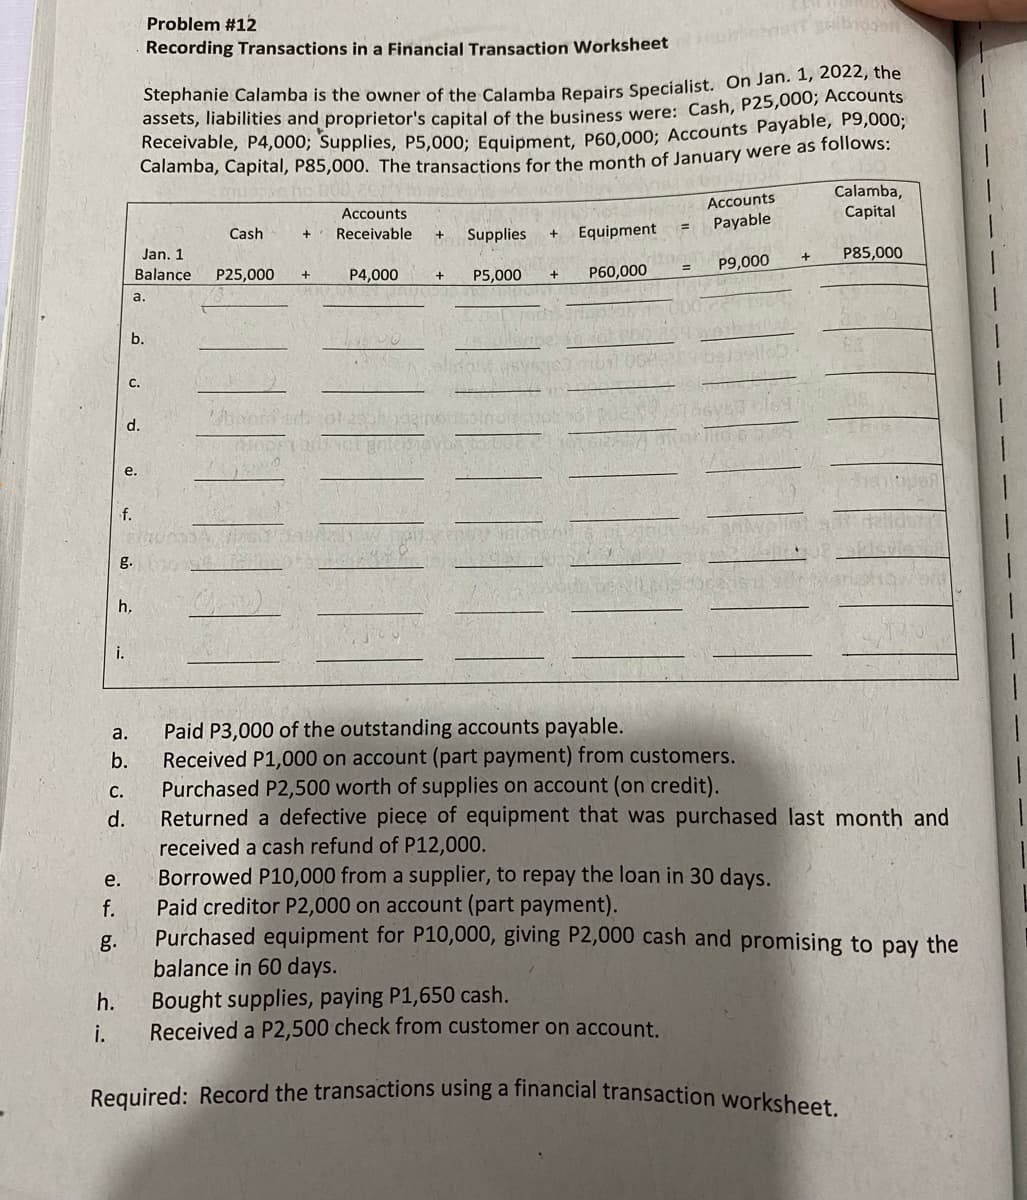 Problem #12
Recording Transactions in a Financial Transaction Worksheet
Stephanie Calamba is the owner of the Calamba Benairs Specialist. On Jan. 1, 2022, the
assets, liabilities and proprietor's capital of the business were: Cash, P25,000; ACCounts
Receivable, P4,000; Supplies, P5,000; Equipment, P60.000; Accounts Payable, P9,000;
Calamba, Capital, P85,000. The transactions for the month of January were as follows:
Calamba,
Capital
Accounts
Accounts
Payable
Cash
Receivable
Supplies
Equipment
Jan. 1
P85,000
P60,000
P9,000
Balance
P25,000
P4,000
P5,000
+
a.
b.
С.
d.
е.
f.
g.
h,
i.
Paid P3,000 of the outstanding accounts payable.
Received P1,000 on account (part payment) from customers.
Purchased P2,500 worth of supplies on account (on credit).
Returned a defective piece of equipment that was purchased last month and
received a cash refund of P12,000.
Borrowed P10,000 from a supplier, to repay the loan in 30 days.
Paid creditor P2,000 on account (part payment).
а.
b.
С.
d.
е.
f.
Purchased equipment for P10,000, giving P2,000 cash and promising to pay the
g.
balance in 60 days.
h.
Bought supplies, paying P1,650 cash.
i.
Received a P2,500 check from customer on account.
Required: Record the transactions using a financial transaction worksheet
